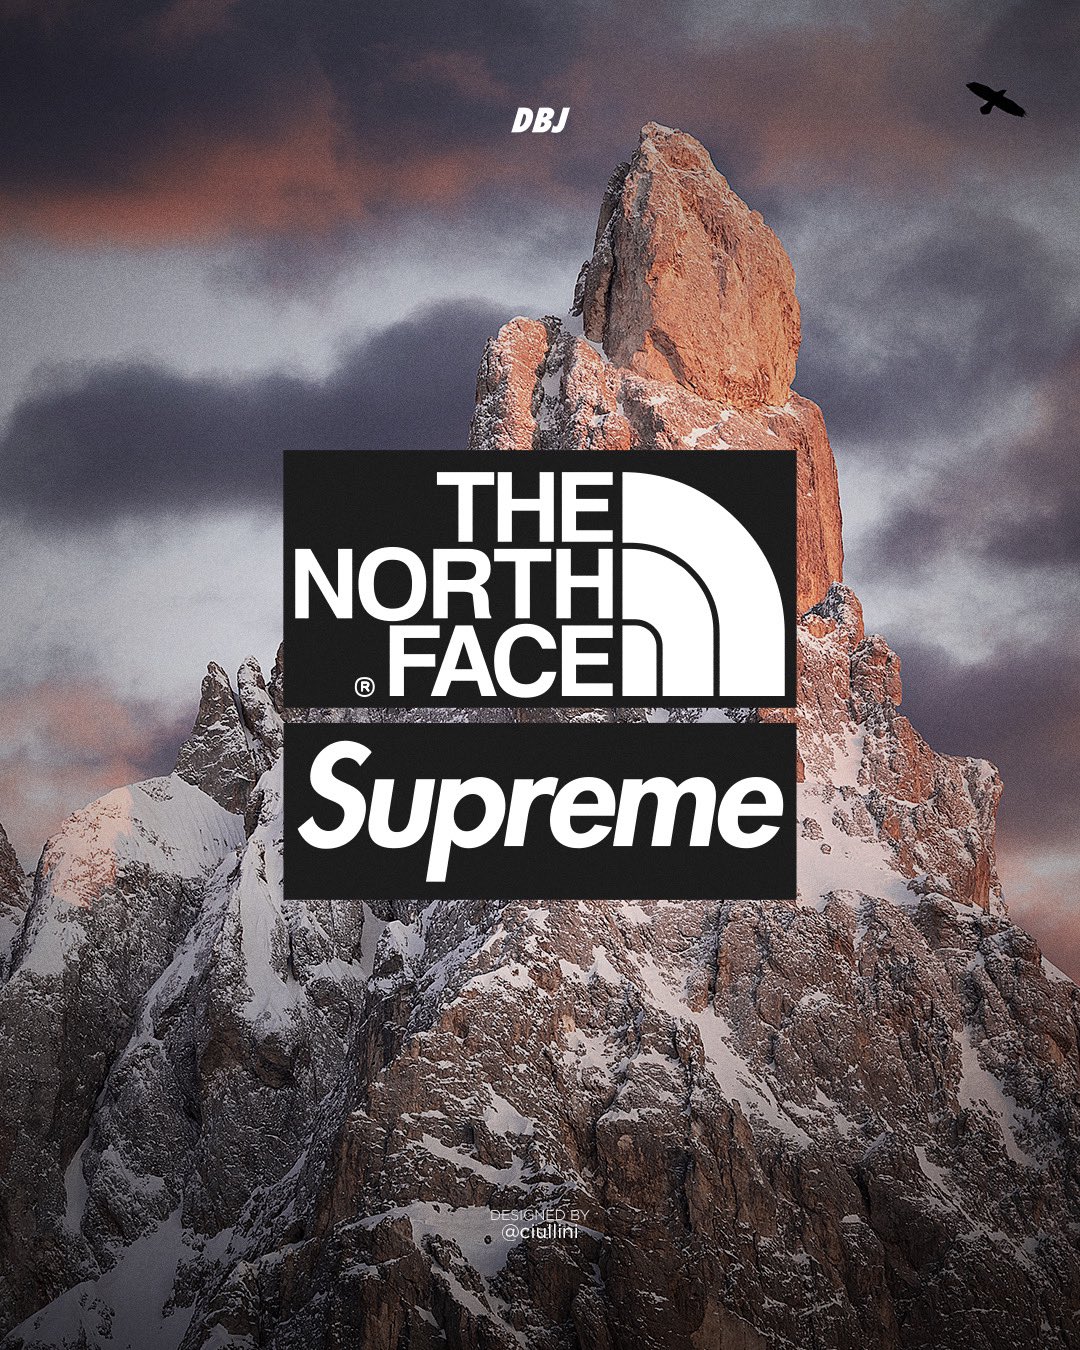 DropsByJay on Instagram: Supreme Week 5 Droplist The North Face, Daidō  Moriyama, Chapstick (US Only) and more set to release in store and online  this Thursday, March 24th. Stay tuned for retails